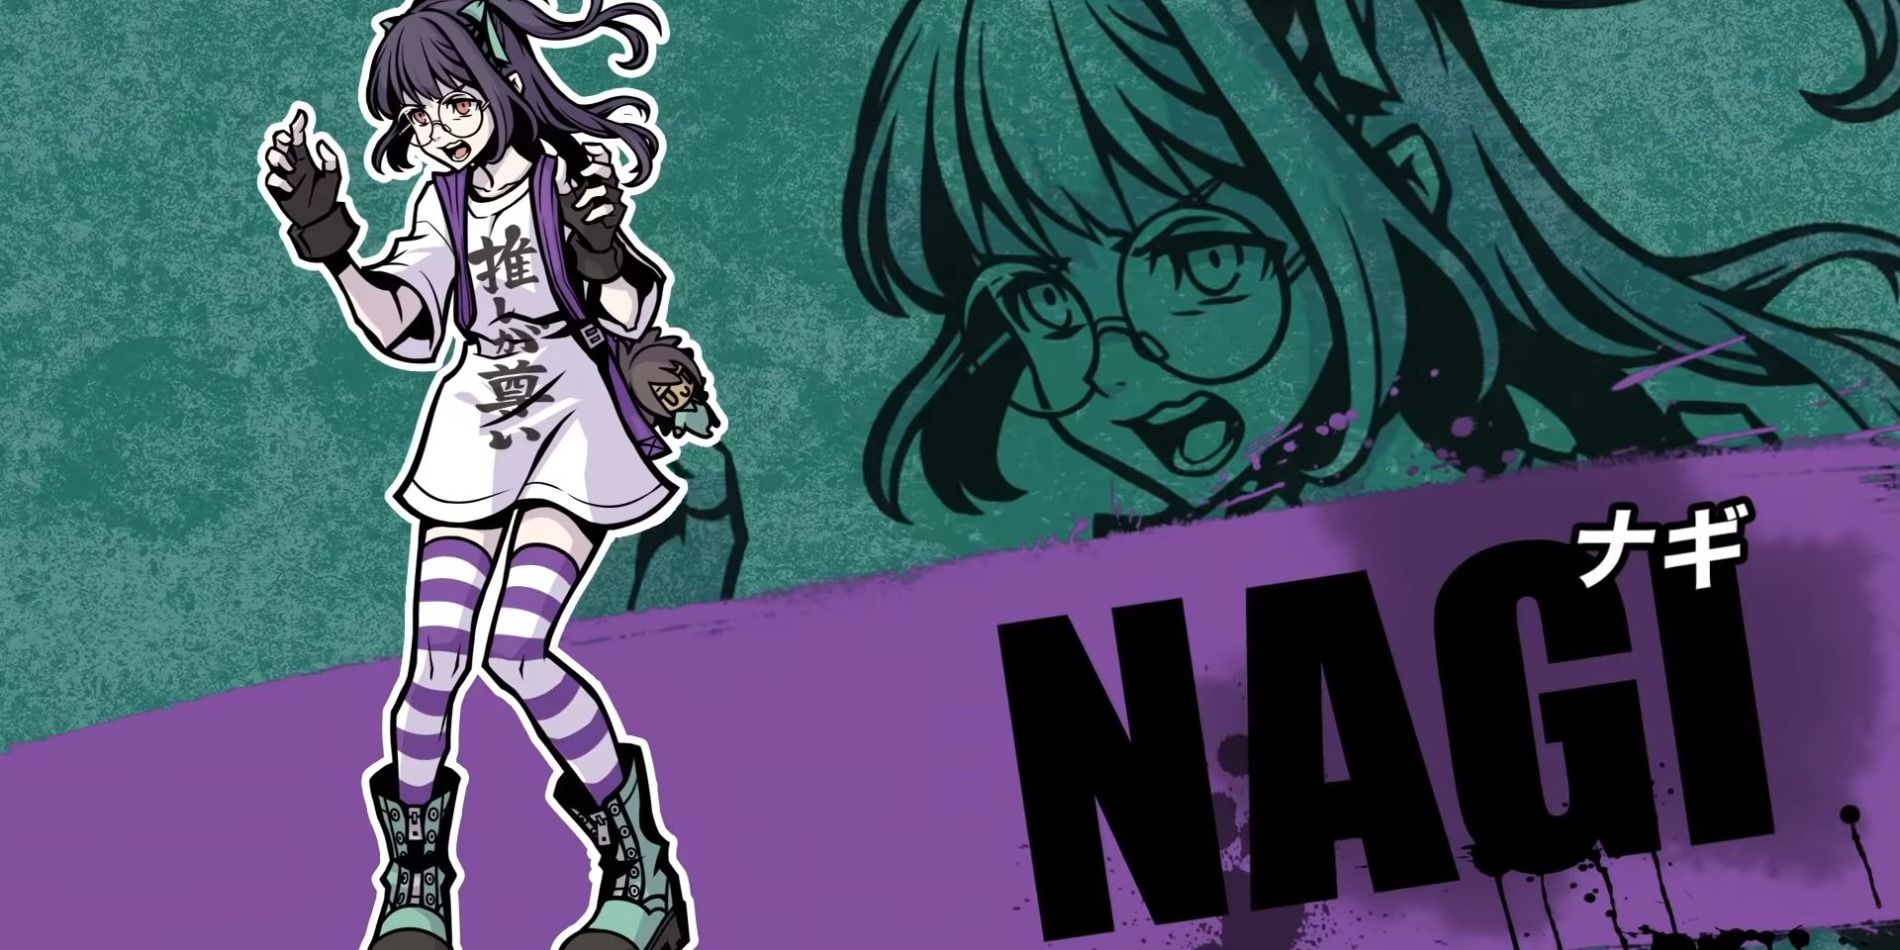 Nagi Usui's Character Portrait in Neo: The World Ends With You